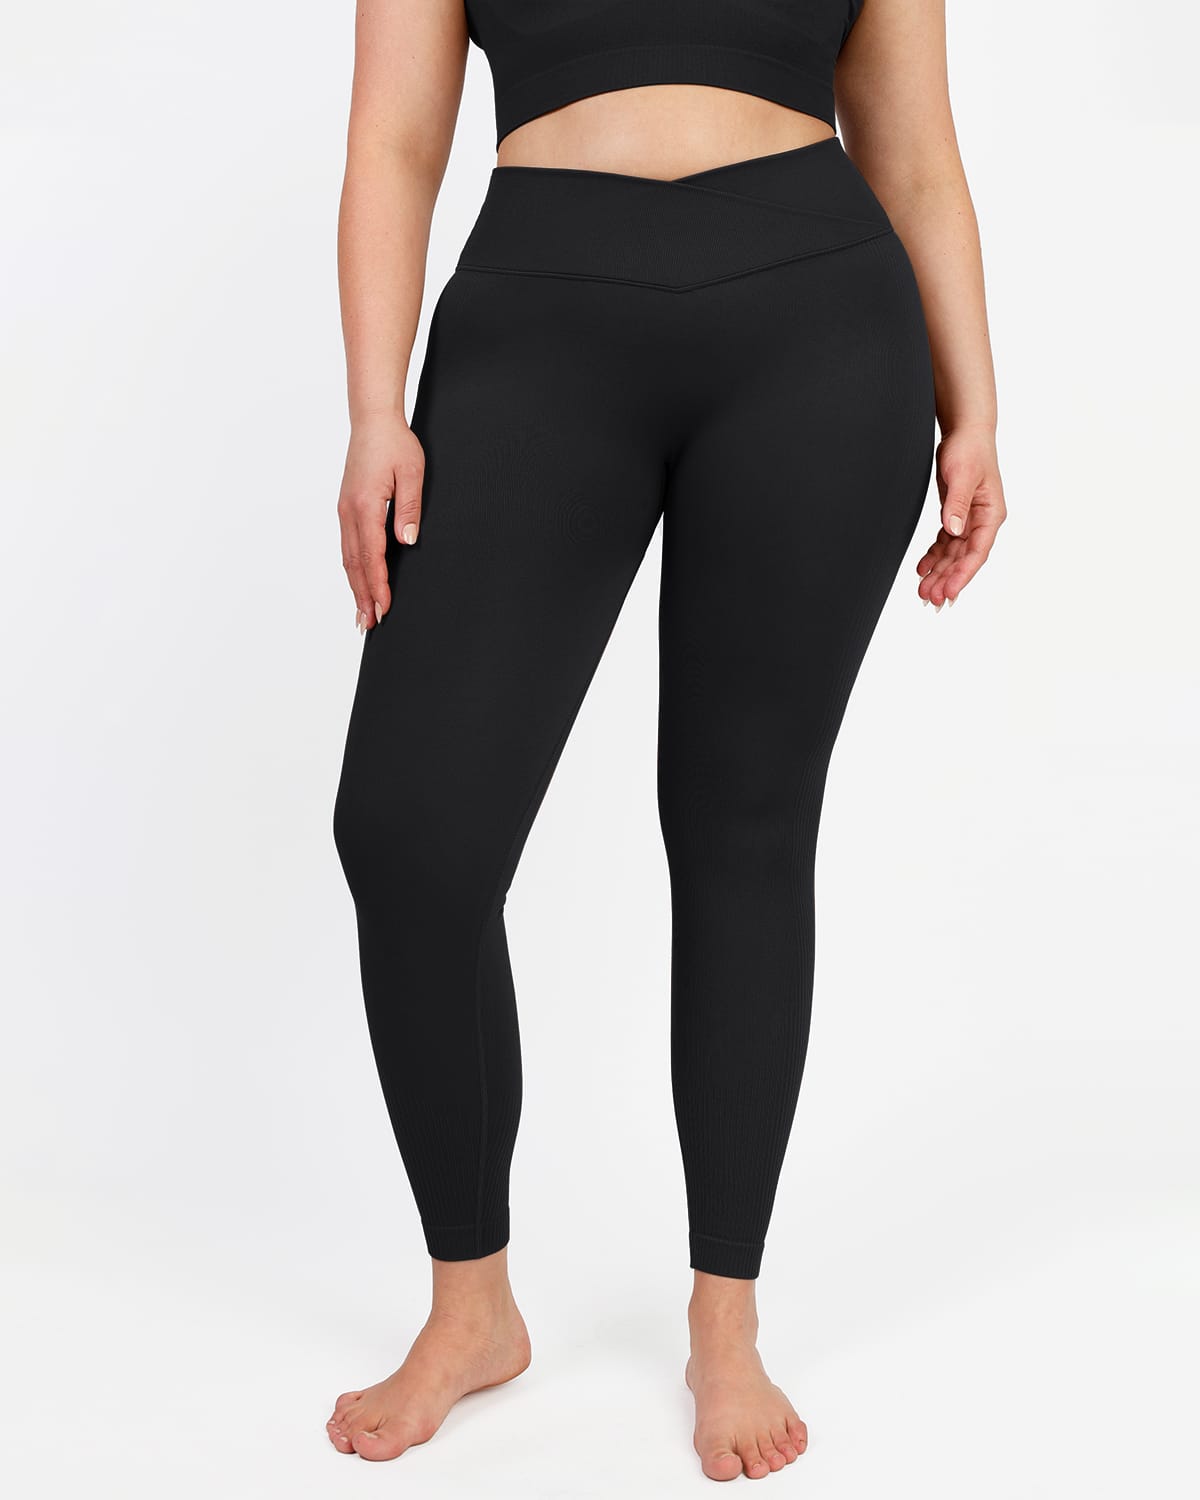 Fuel your workout intensity with the Cosmolle Seamless Crossover Leggi